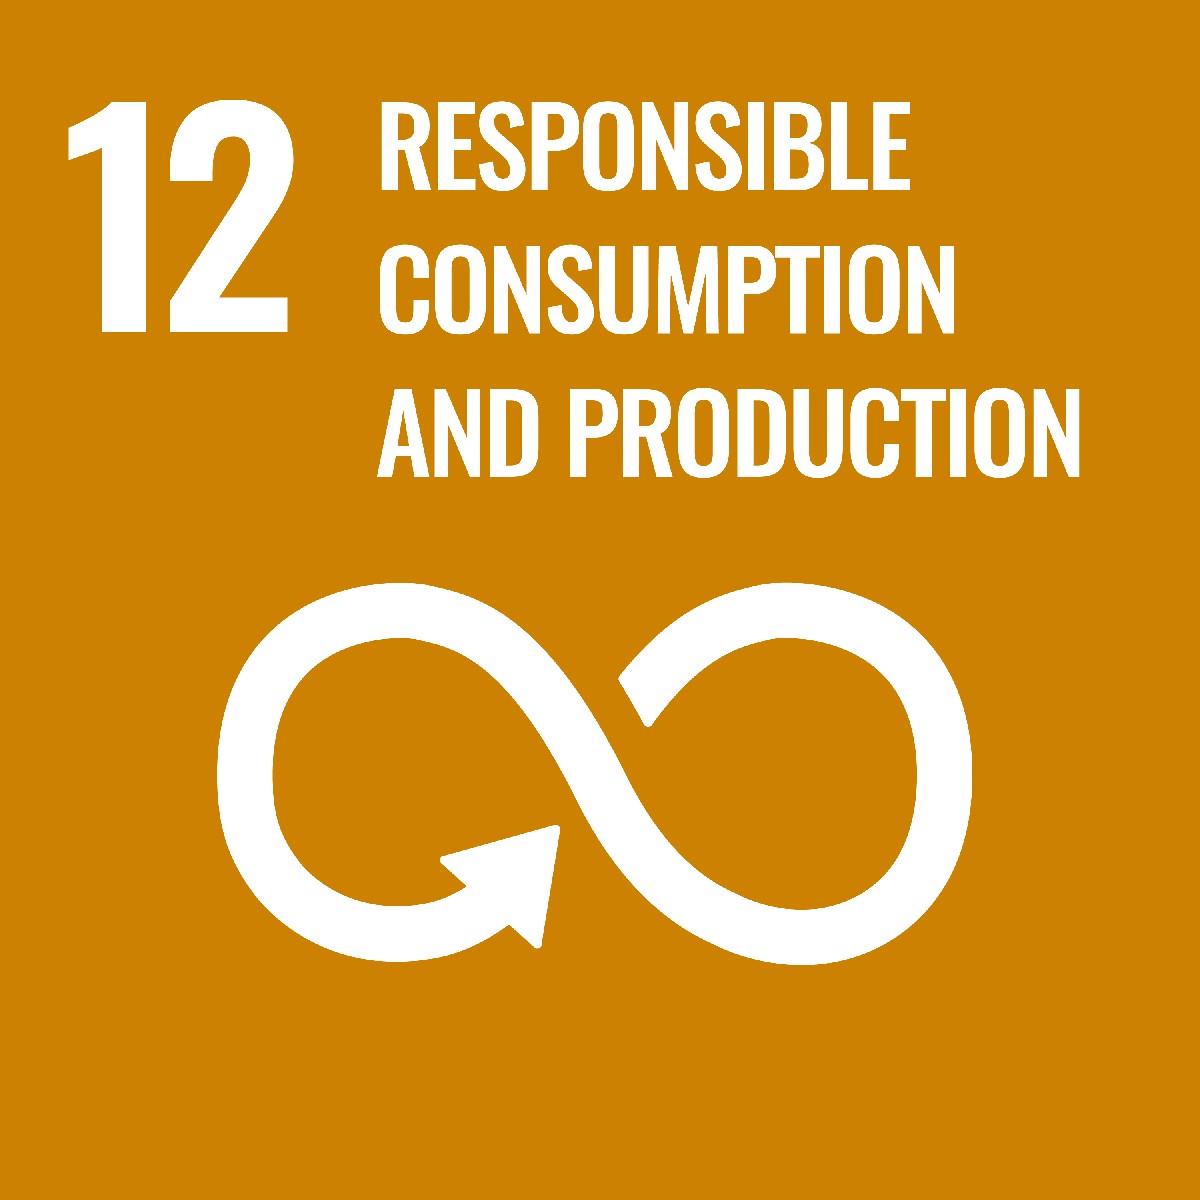 icon for sustainable development goal responsible consumption and production